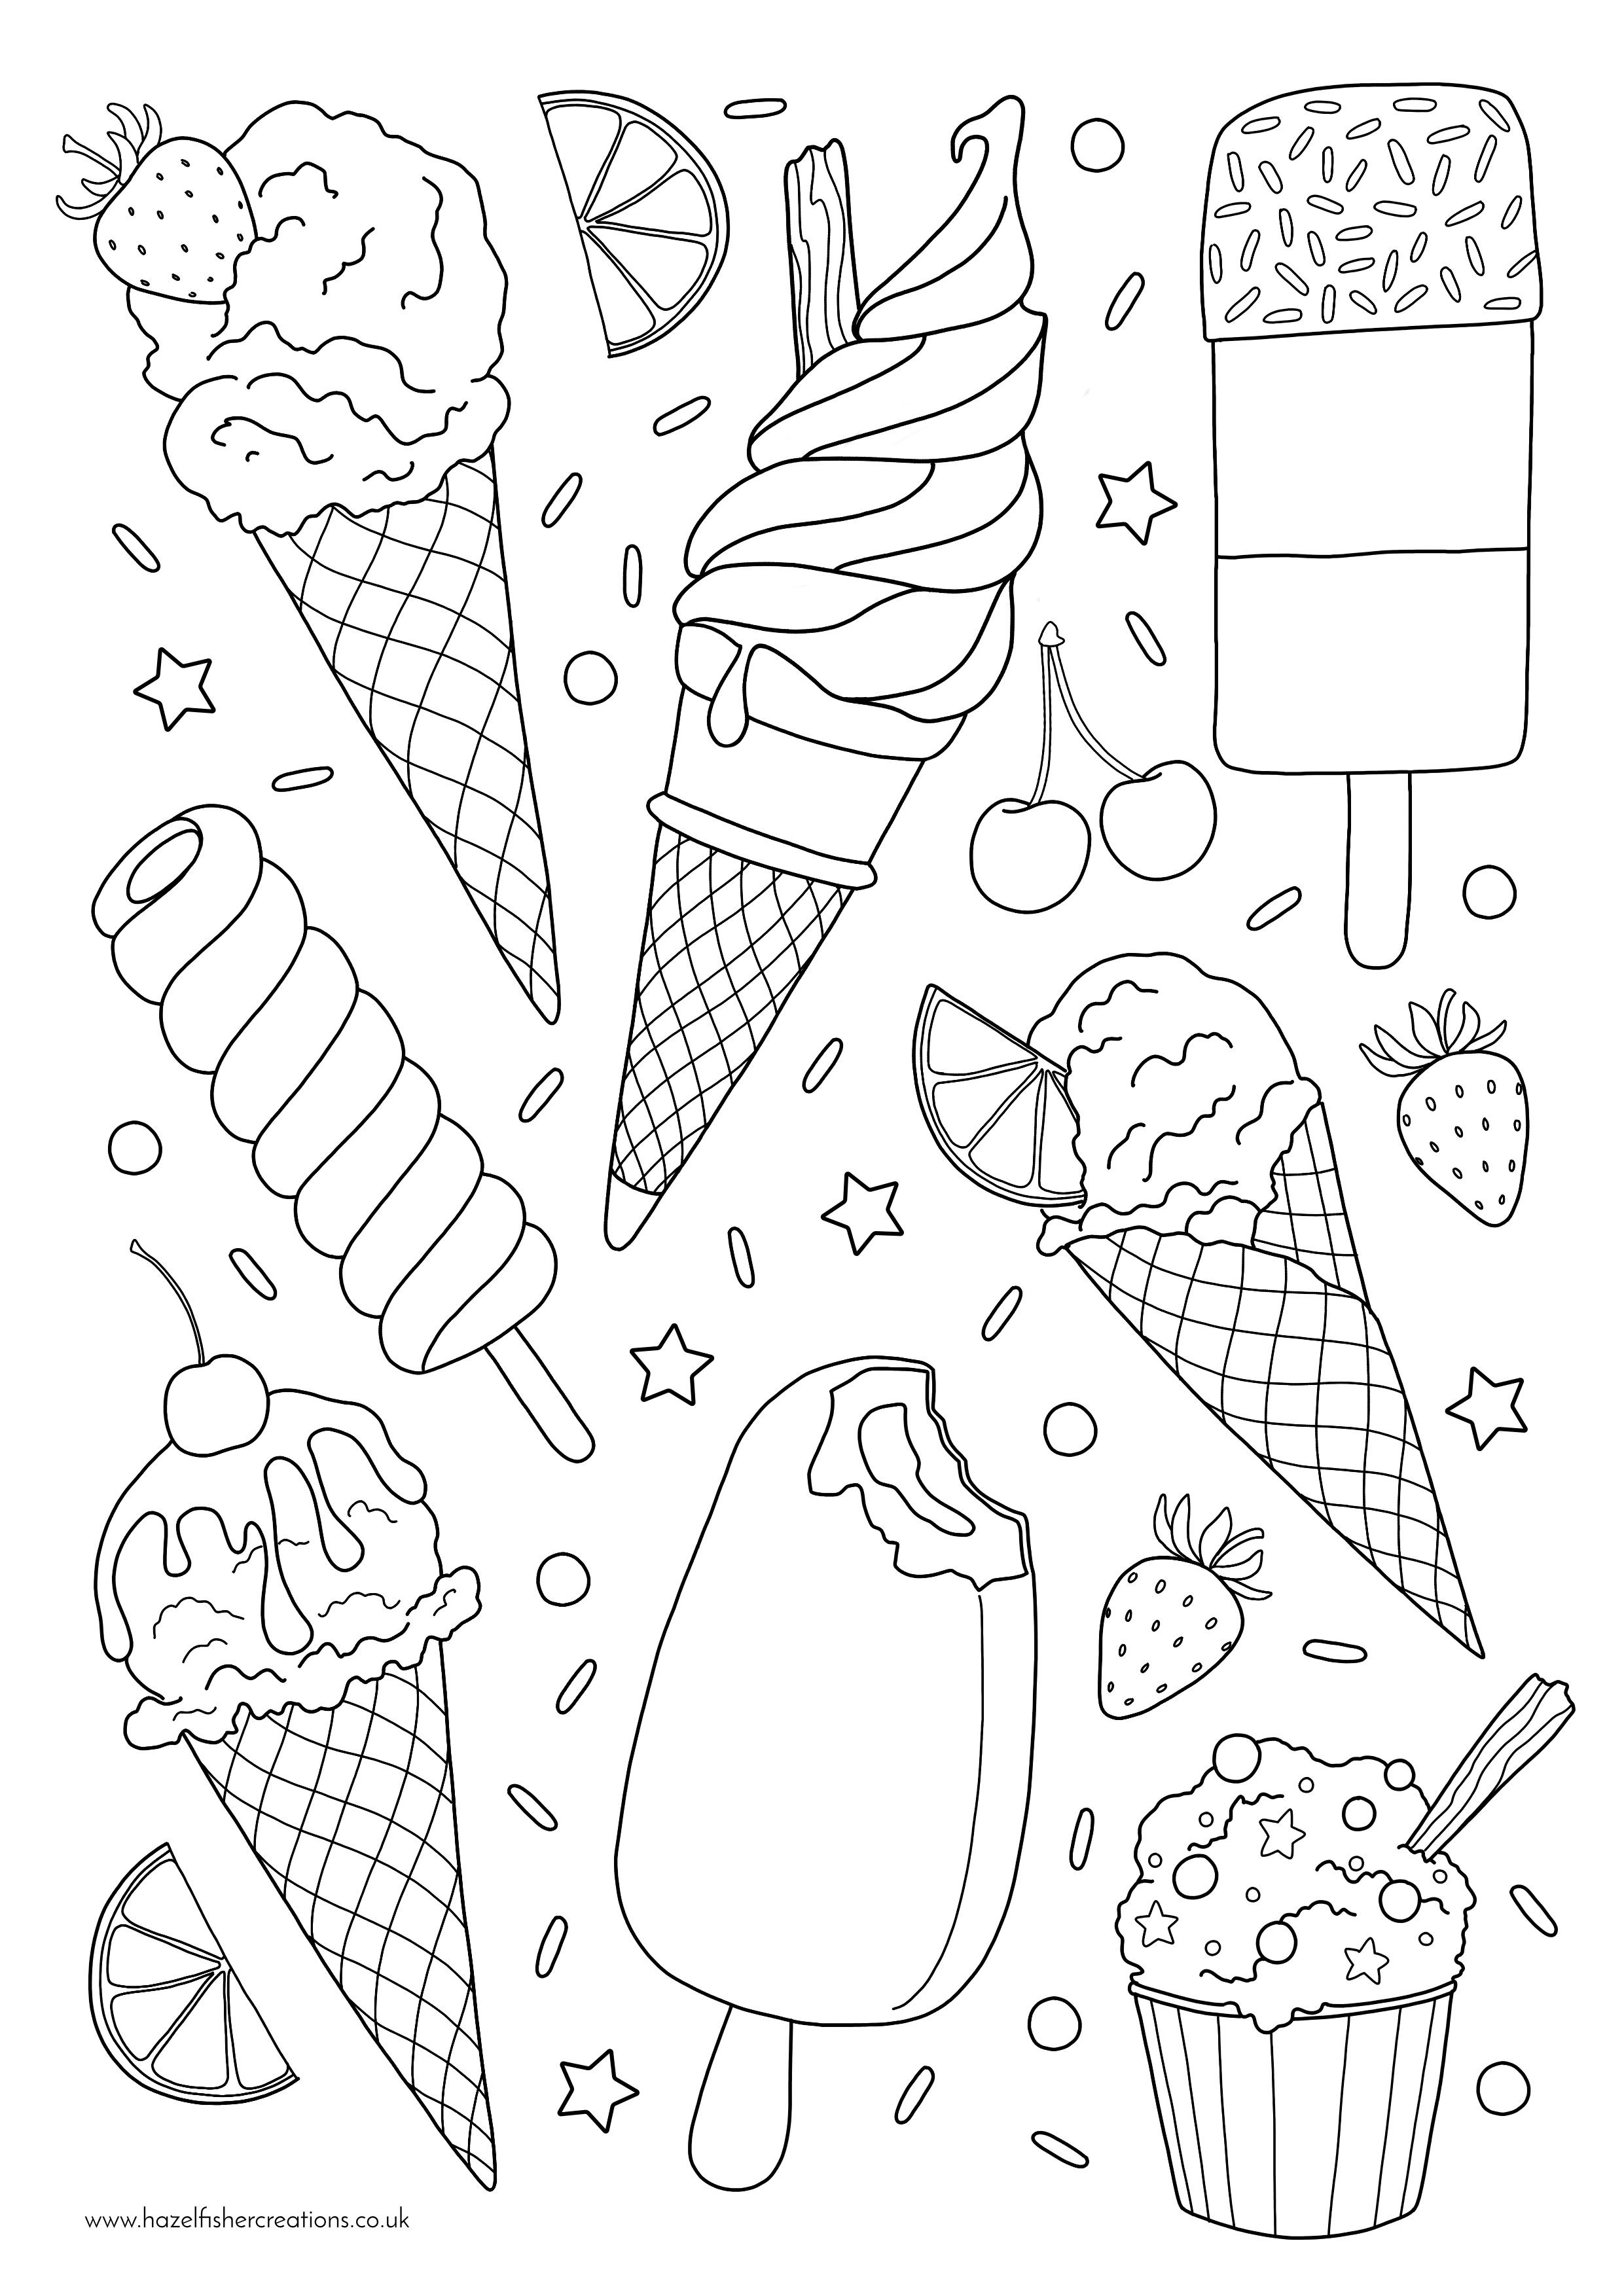 Ice Cream Colouring In Activity Sheet   image